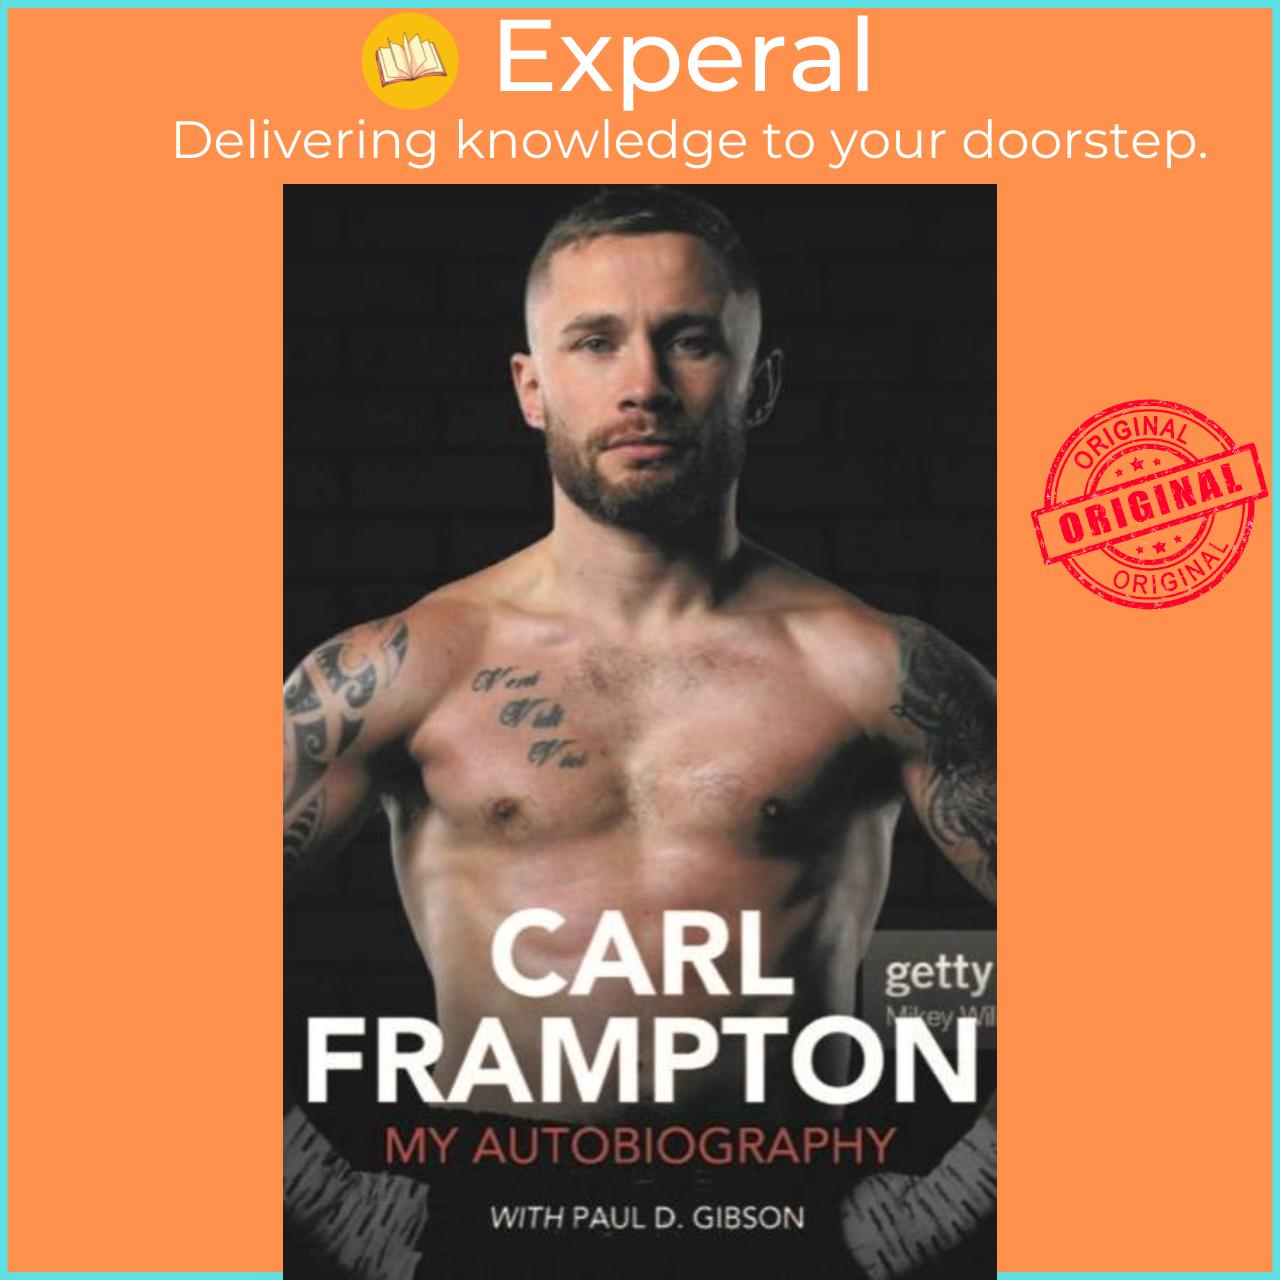 Sách - Carl Frampton - My Autobiography by Paul D. Gibson (UK edition, hardcover)